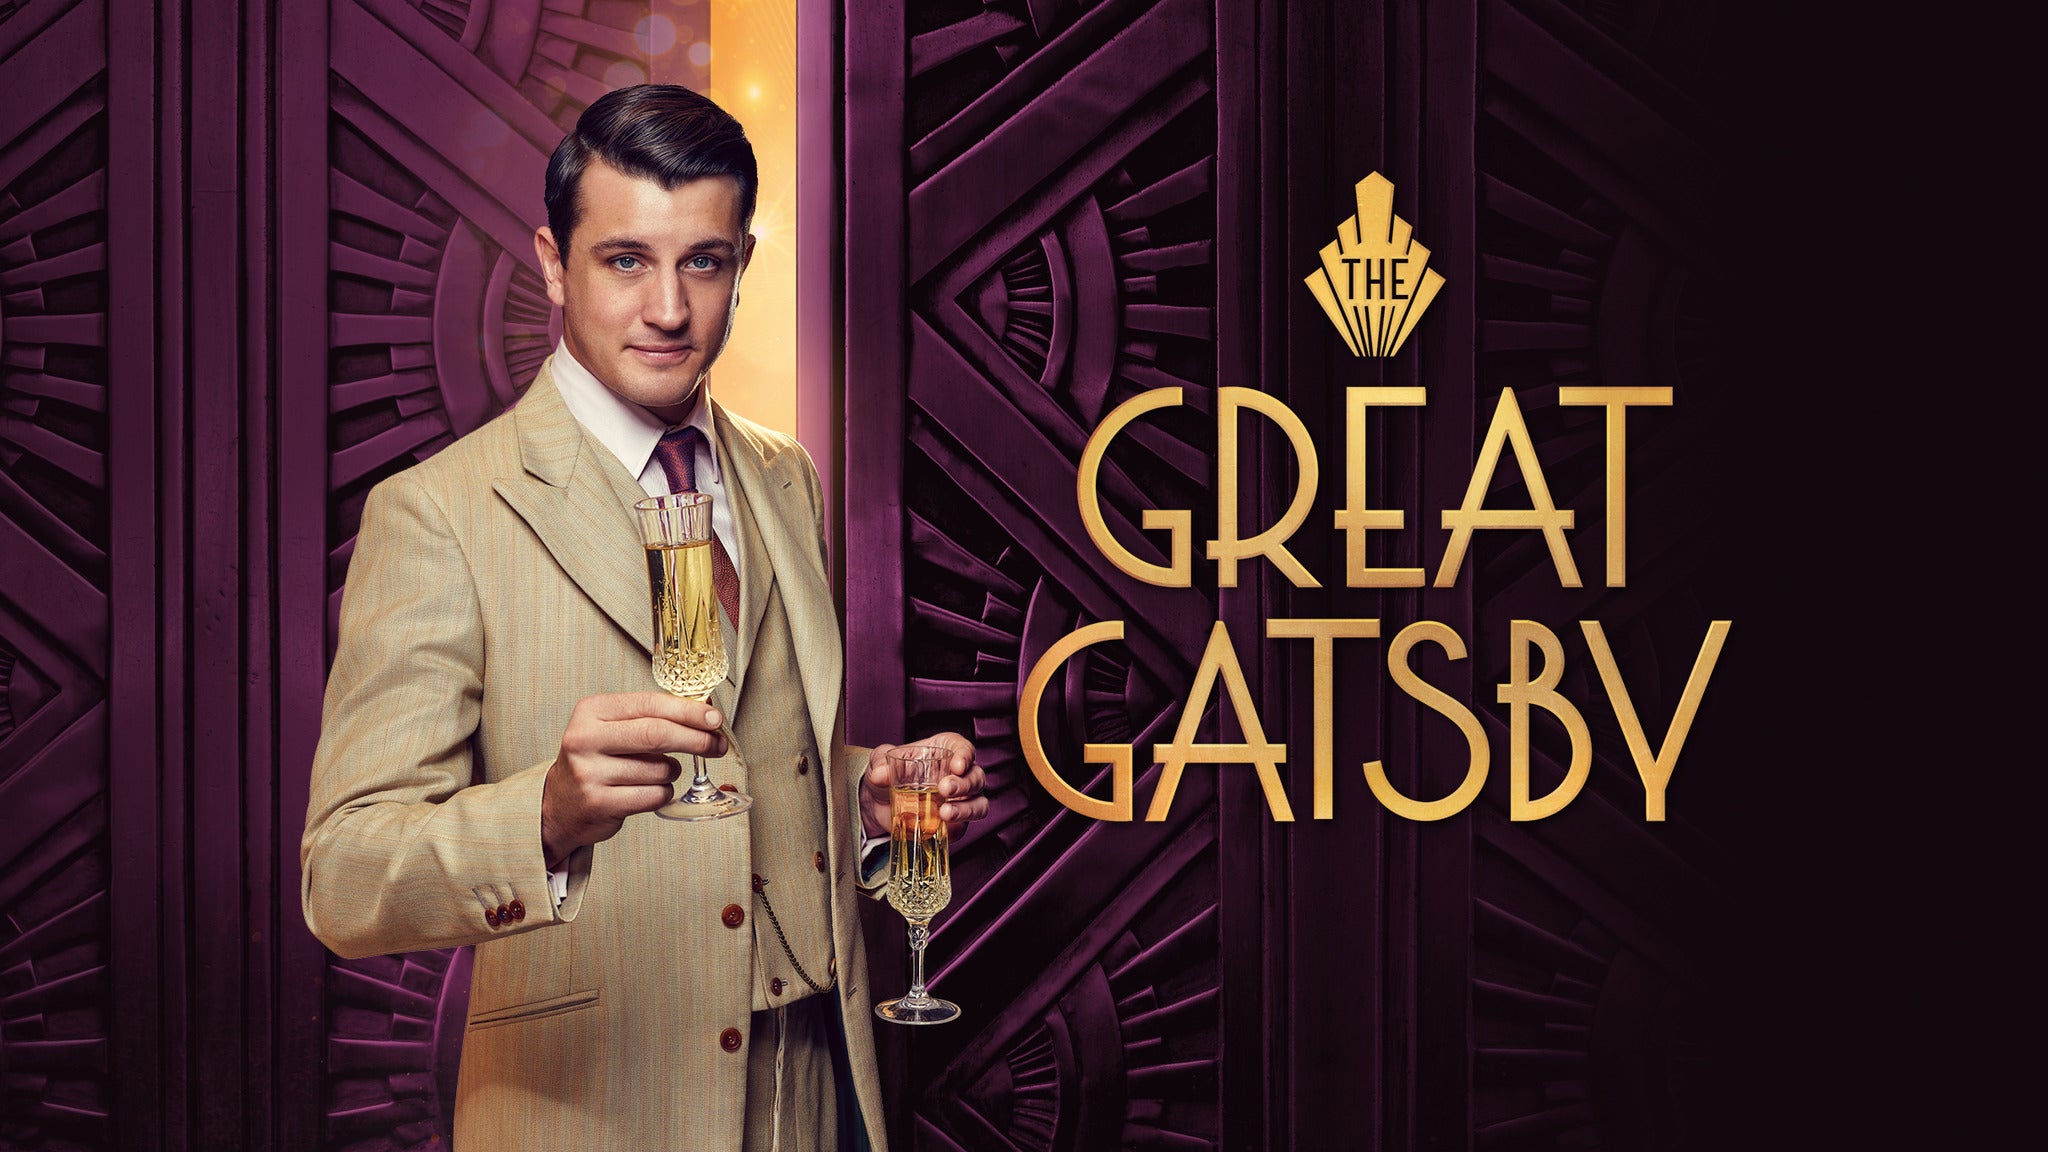 The Great Gatsby - Immersive